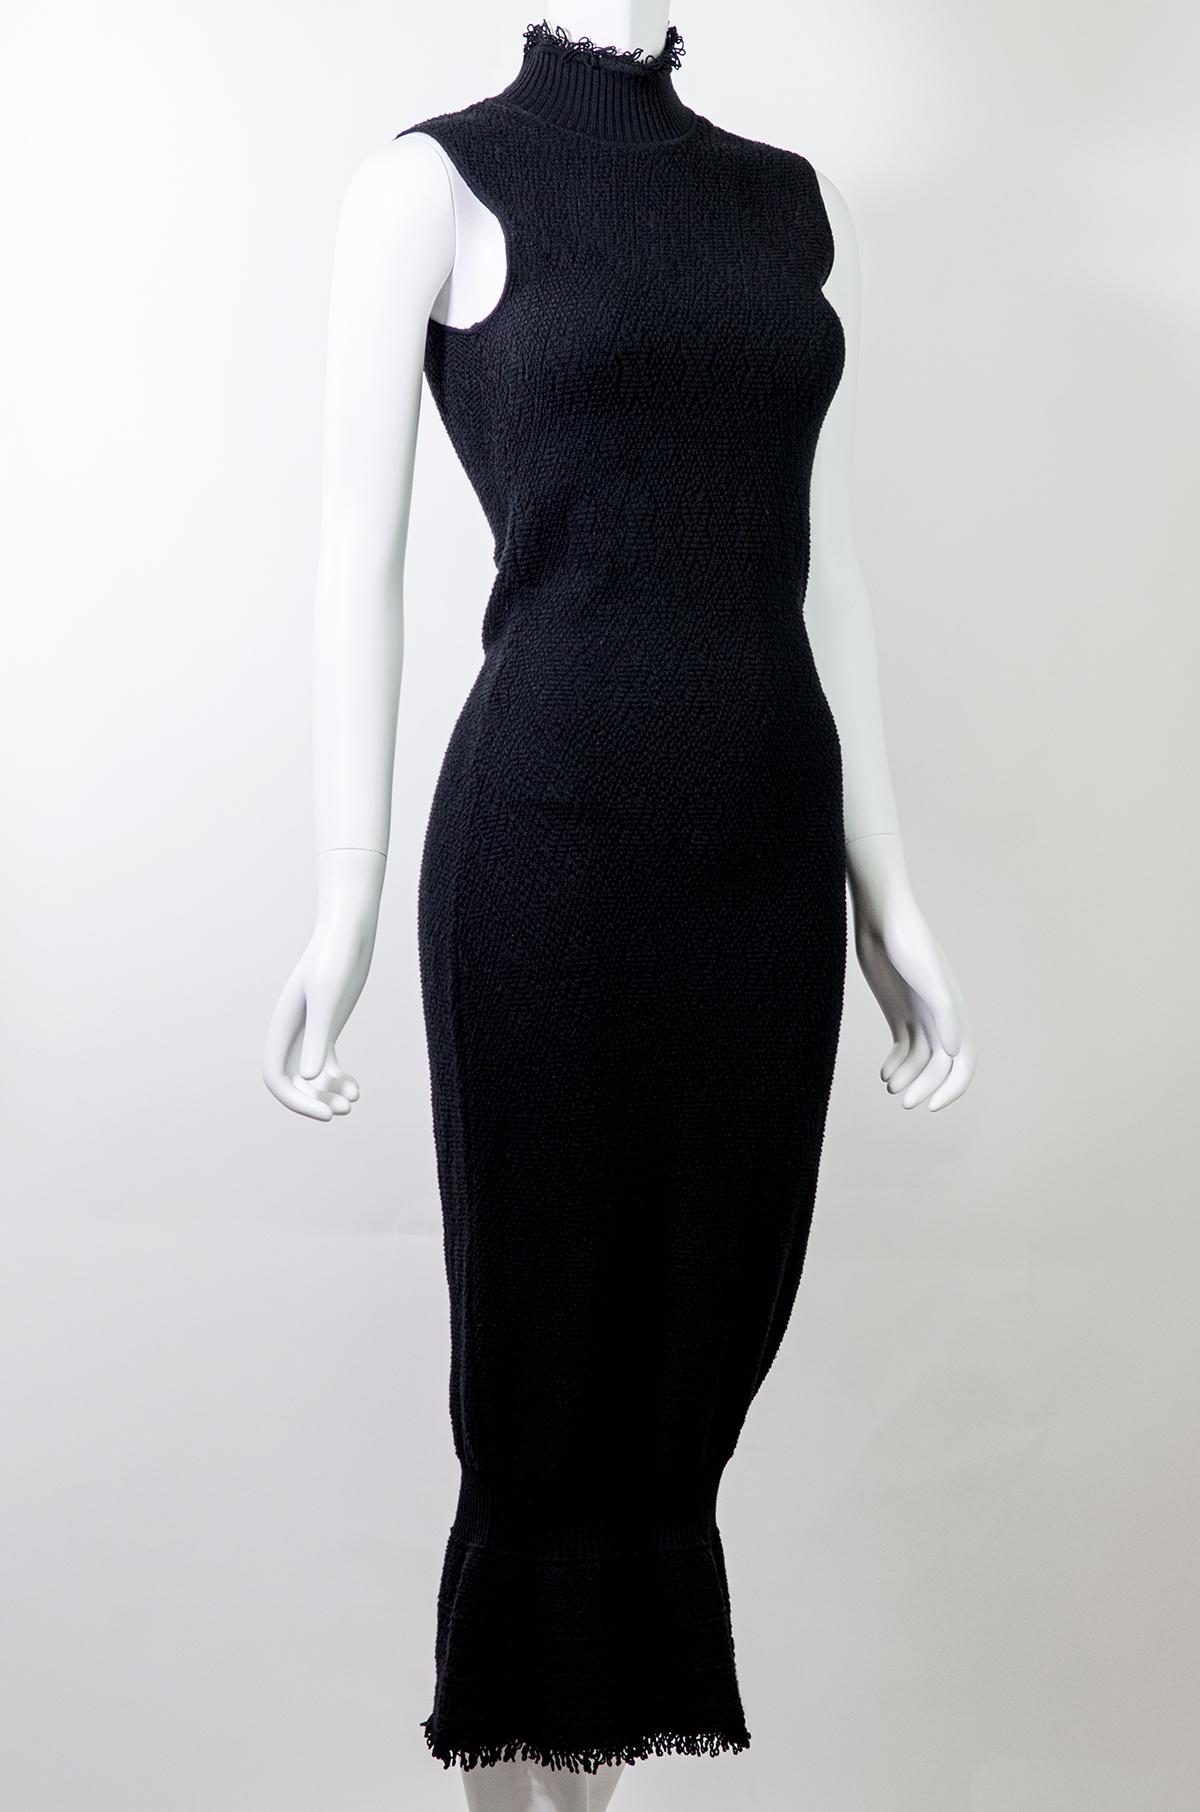 CHRISTIAN DIOR by JOHN GALLIANO F/W 1999 Textured Knit Dress FR40 For Sale 1